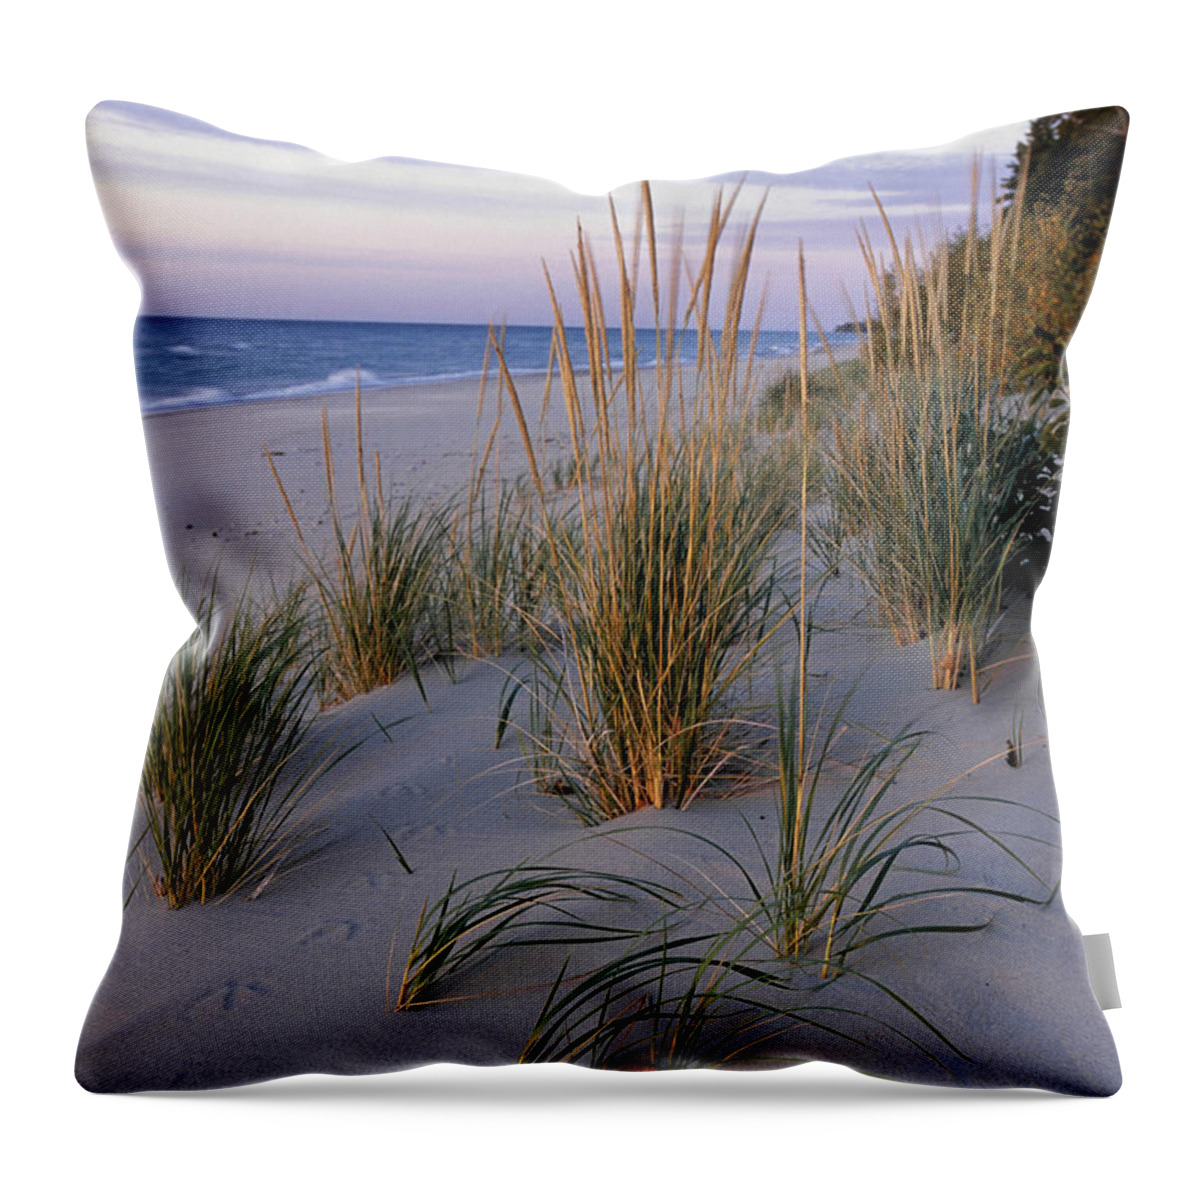 Tranquility Throw Pillow featuring the photograph Pictured Rocks National Lakeshore. Lake by Ed Reschke